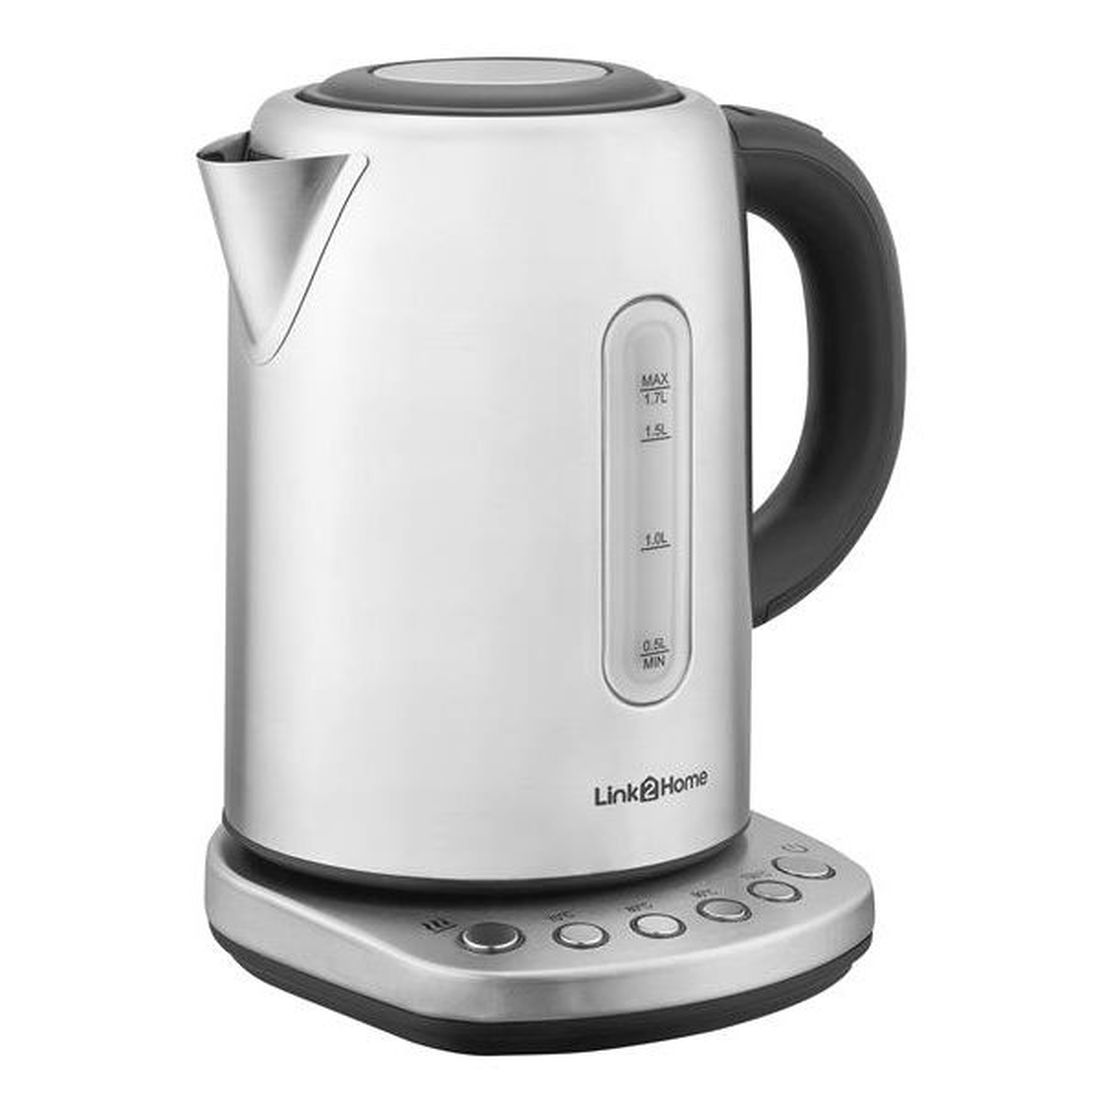 Link2Home Stainless Steel Smart Kettle 1.7L 3000W                                         